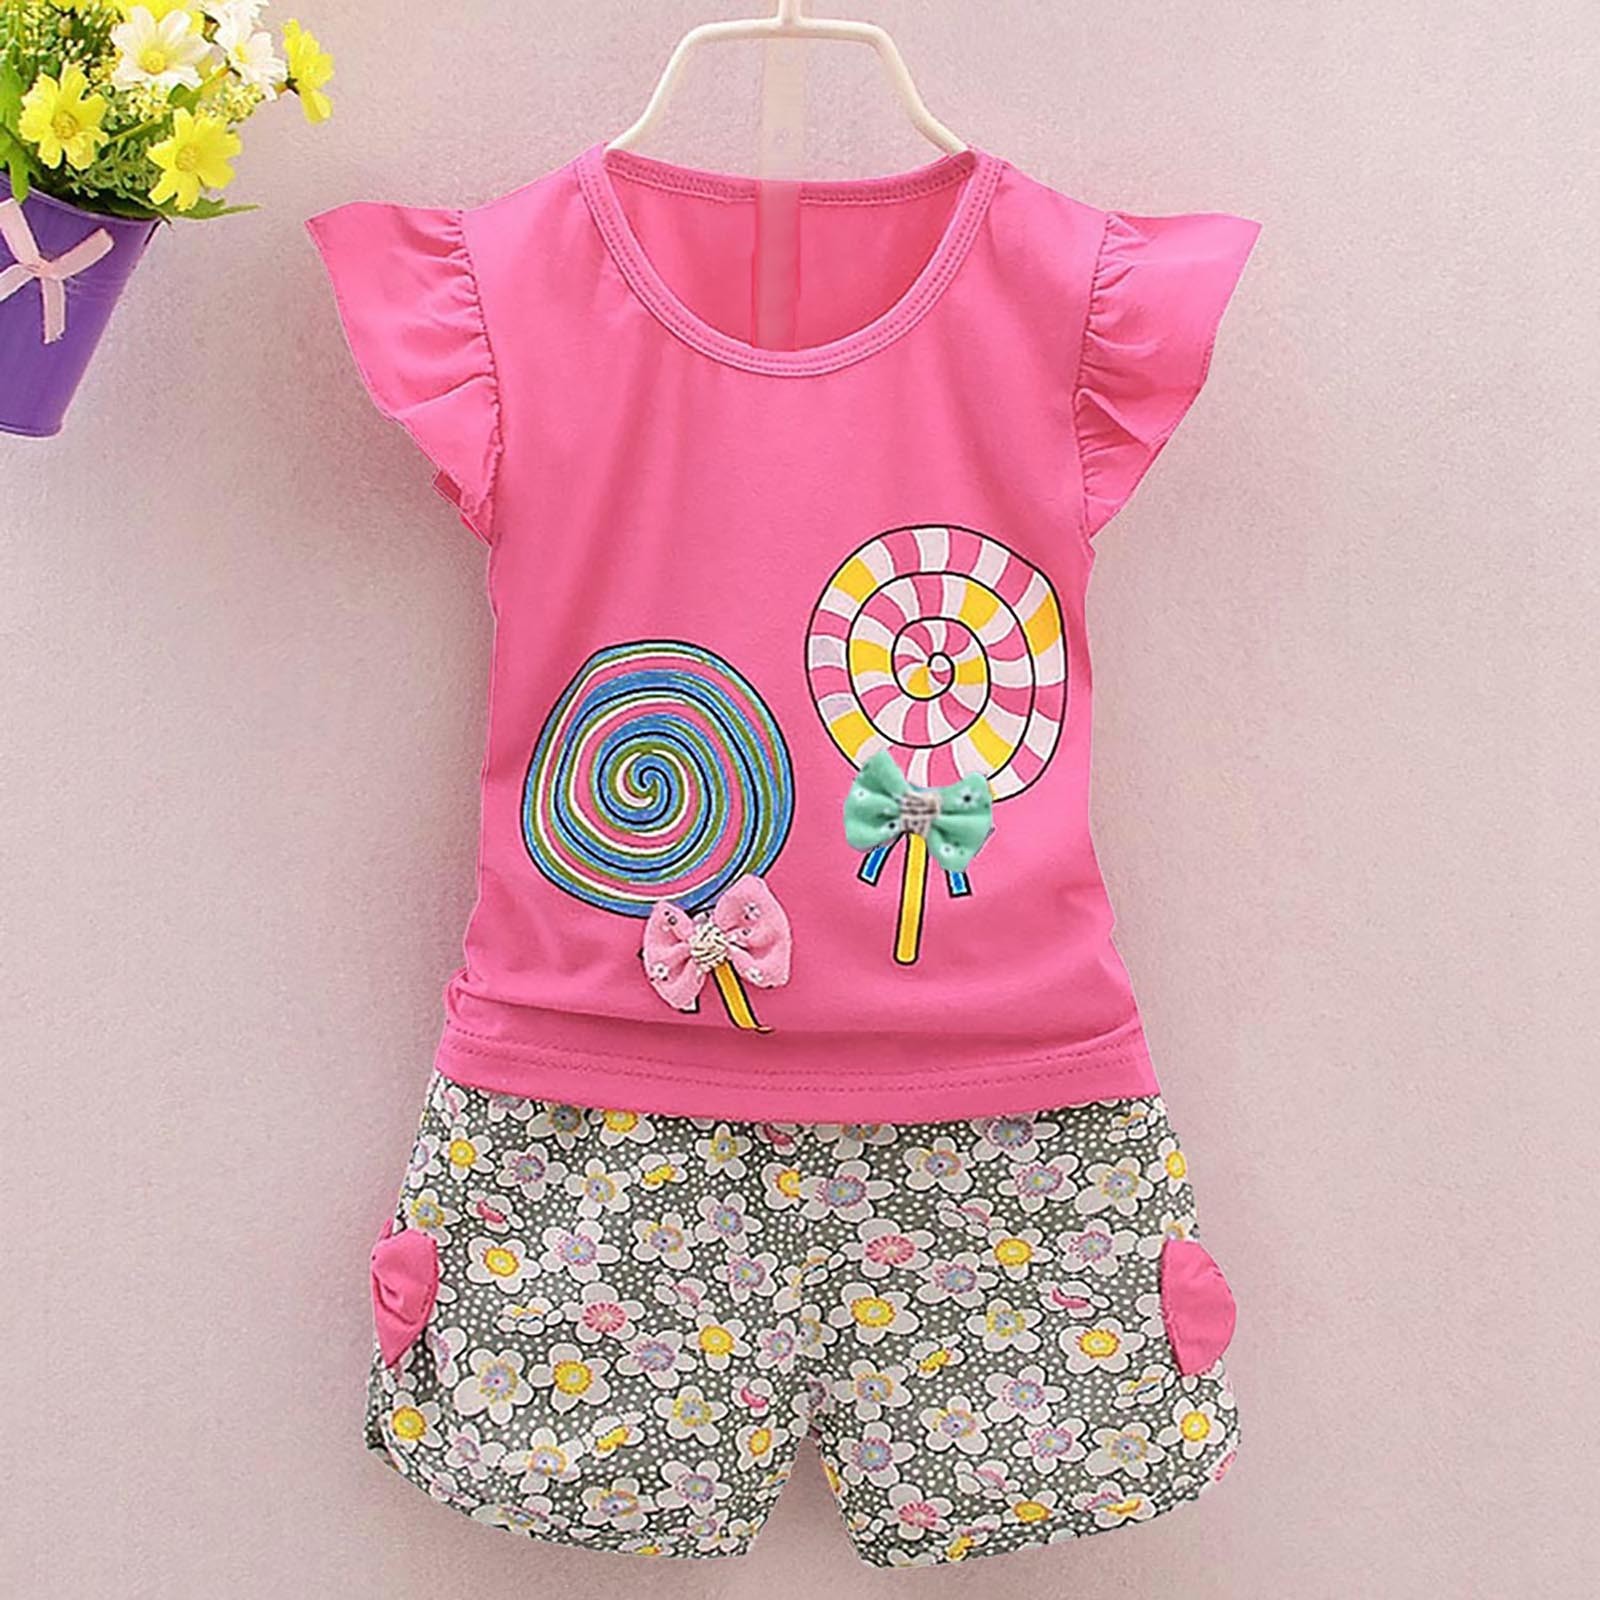 ZHAGHMIN Outfits For Kids T-Shirt Lolly Girls 2Pcs Pants Toddler Outfits Set Baby Clothes Kids Tops+Short Girls Outfits&Set Baby Wrap For Girls 8 Girls Outfits Baby Blankets For Girls Size Small Gir - image 2 of 9